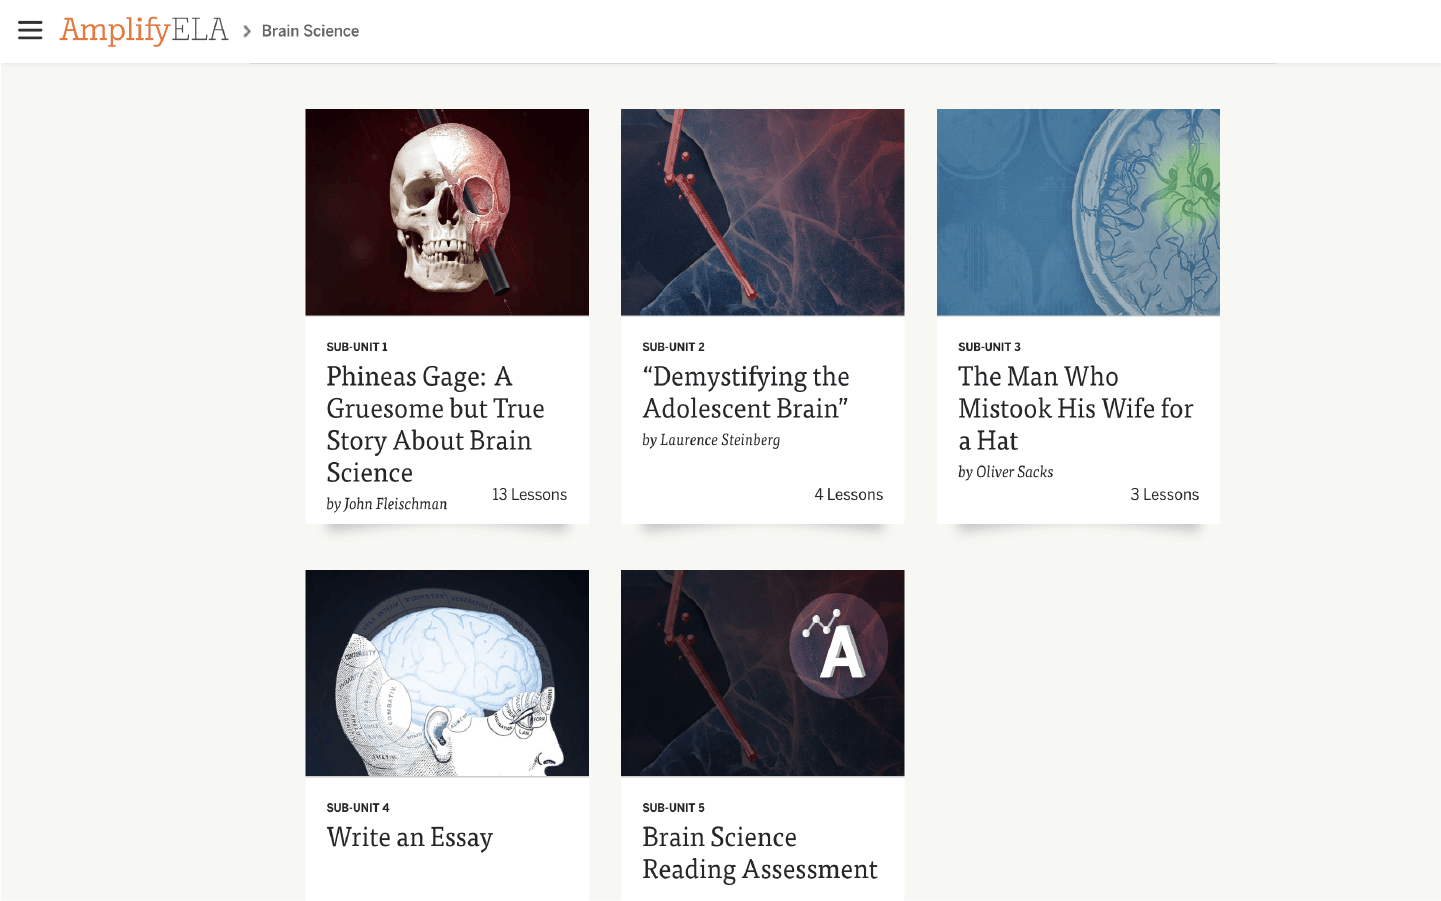 Educational website thumbnails for ſֱ ELA: details human brain science topics and lessons with illustrations, including a famous case of Phineas Gage.